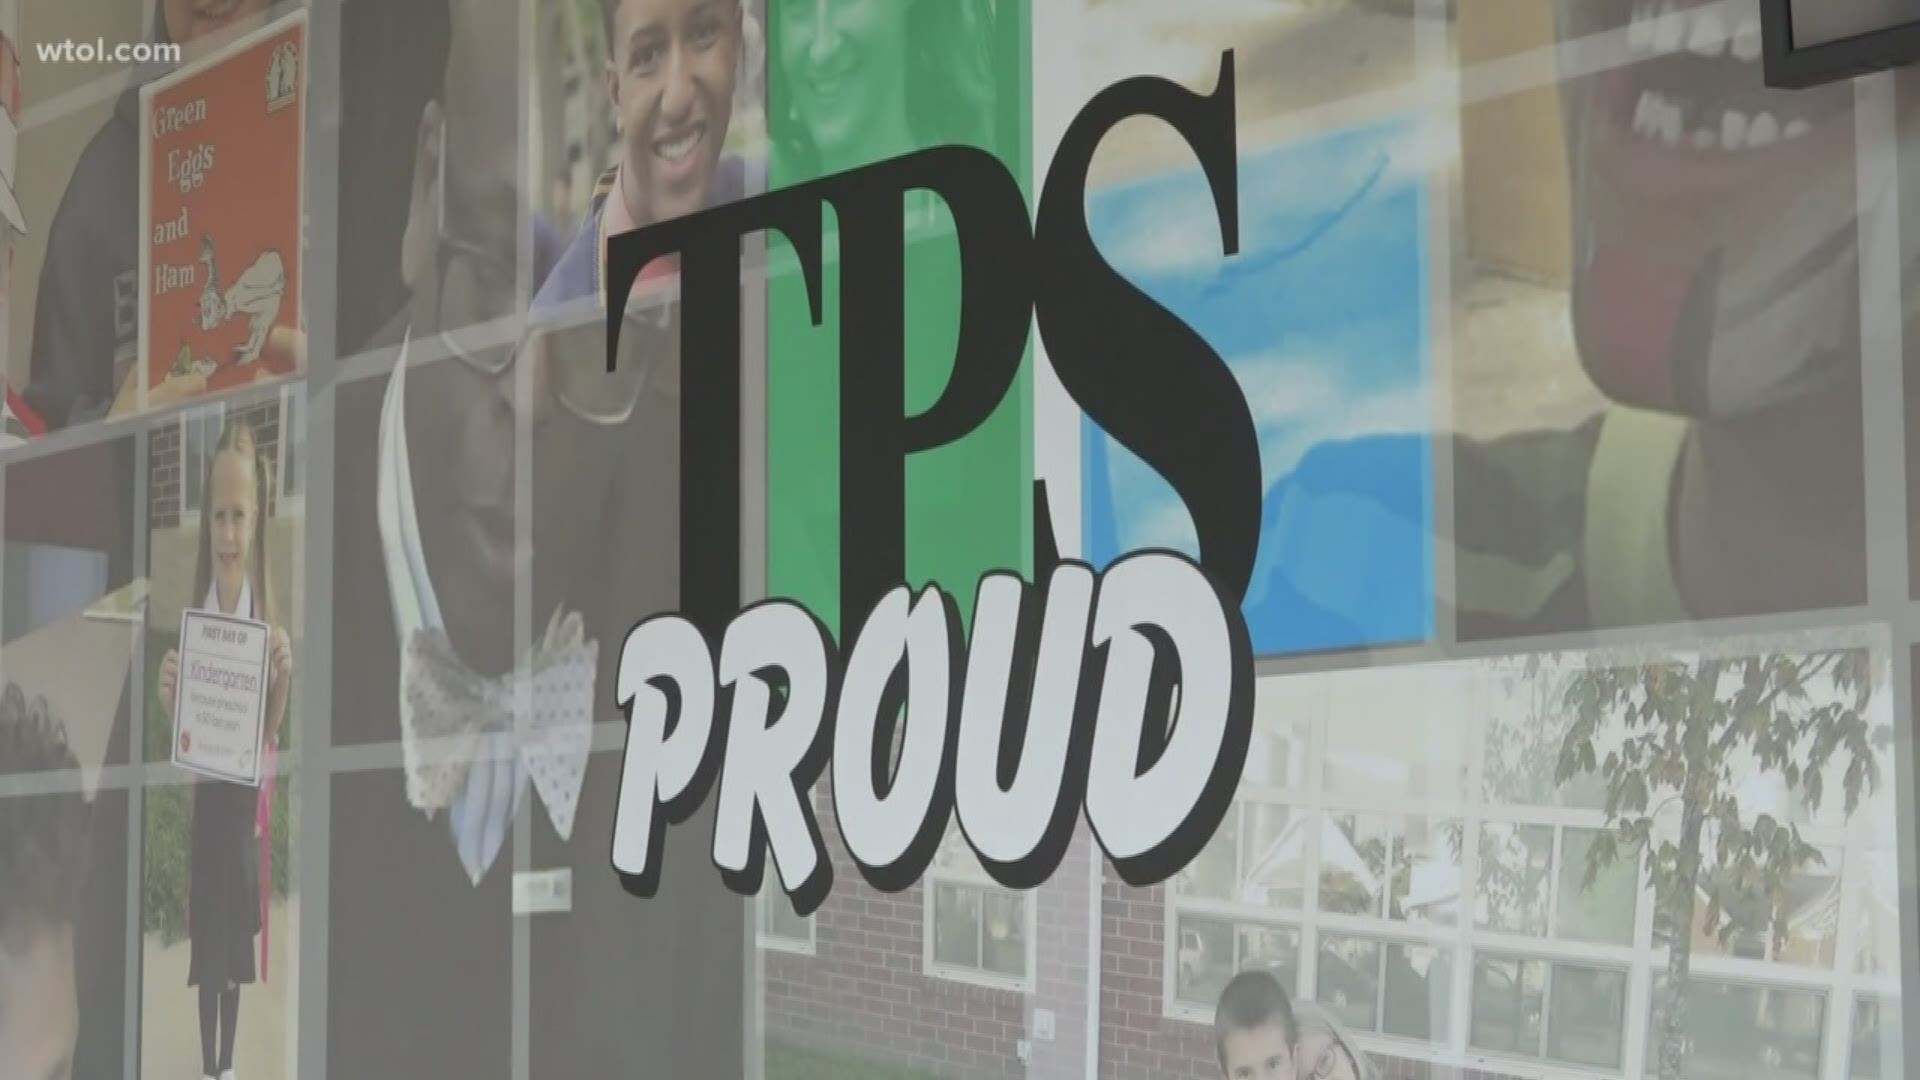 Leaders at Toledo Public Schools explain their plans if closures lasts beyond April 6 and how they are ready to make changes.